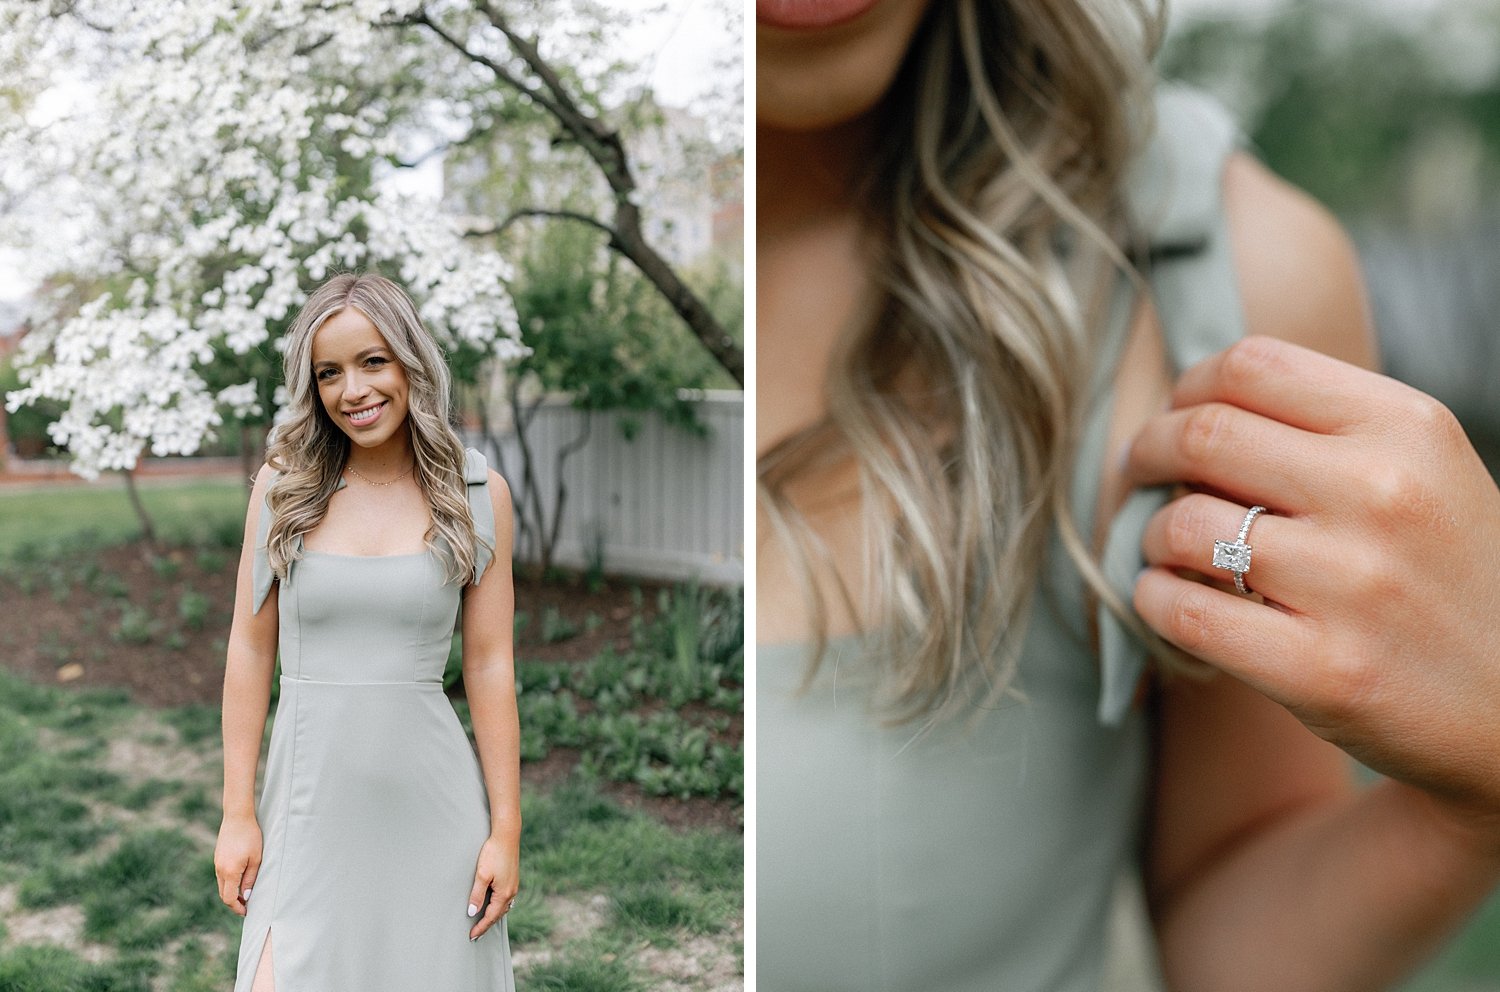 blonde woman with curled hair poses in sage green dress showing off engagement ring